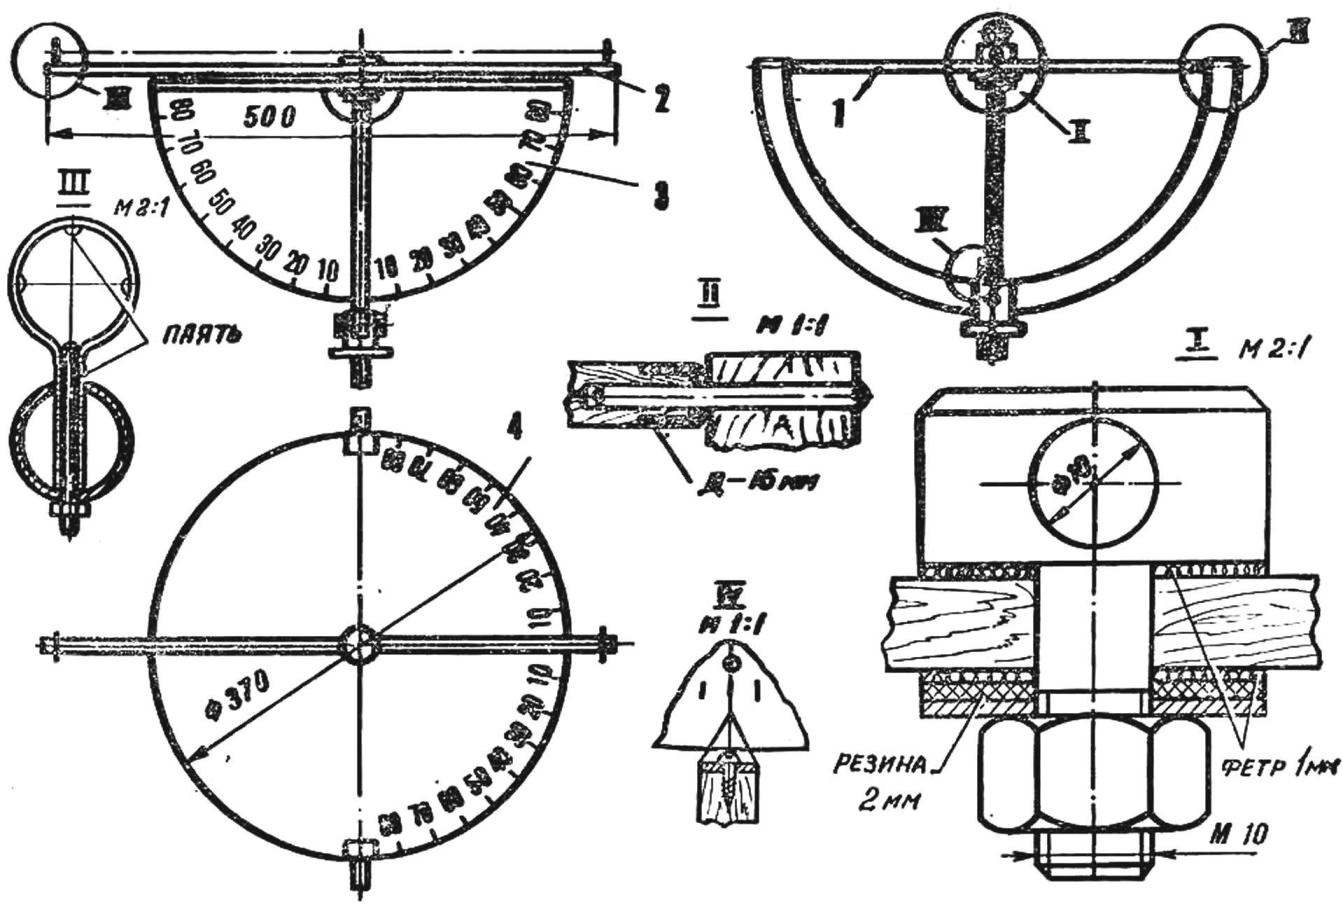 Fig. 3. The protractor on a tripod